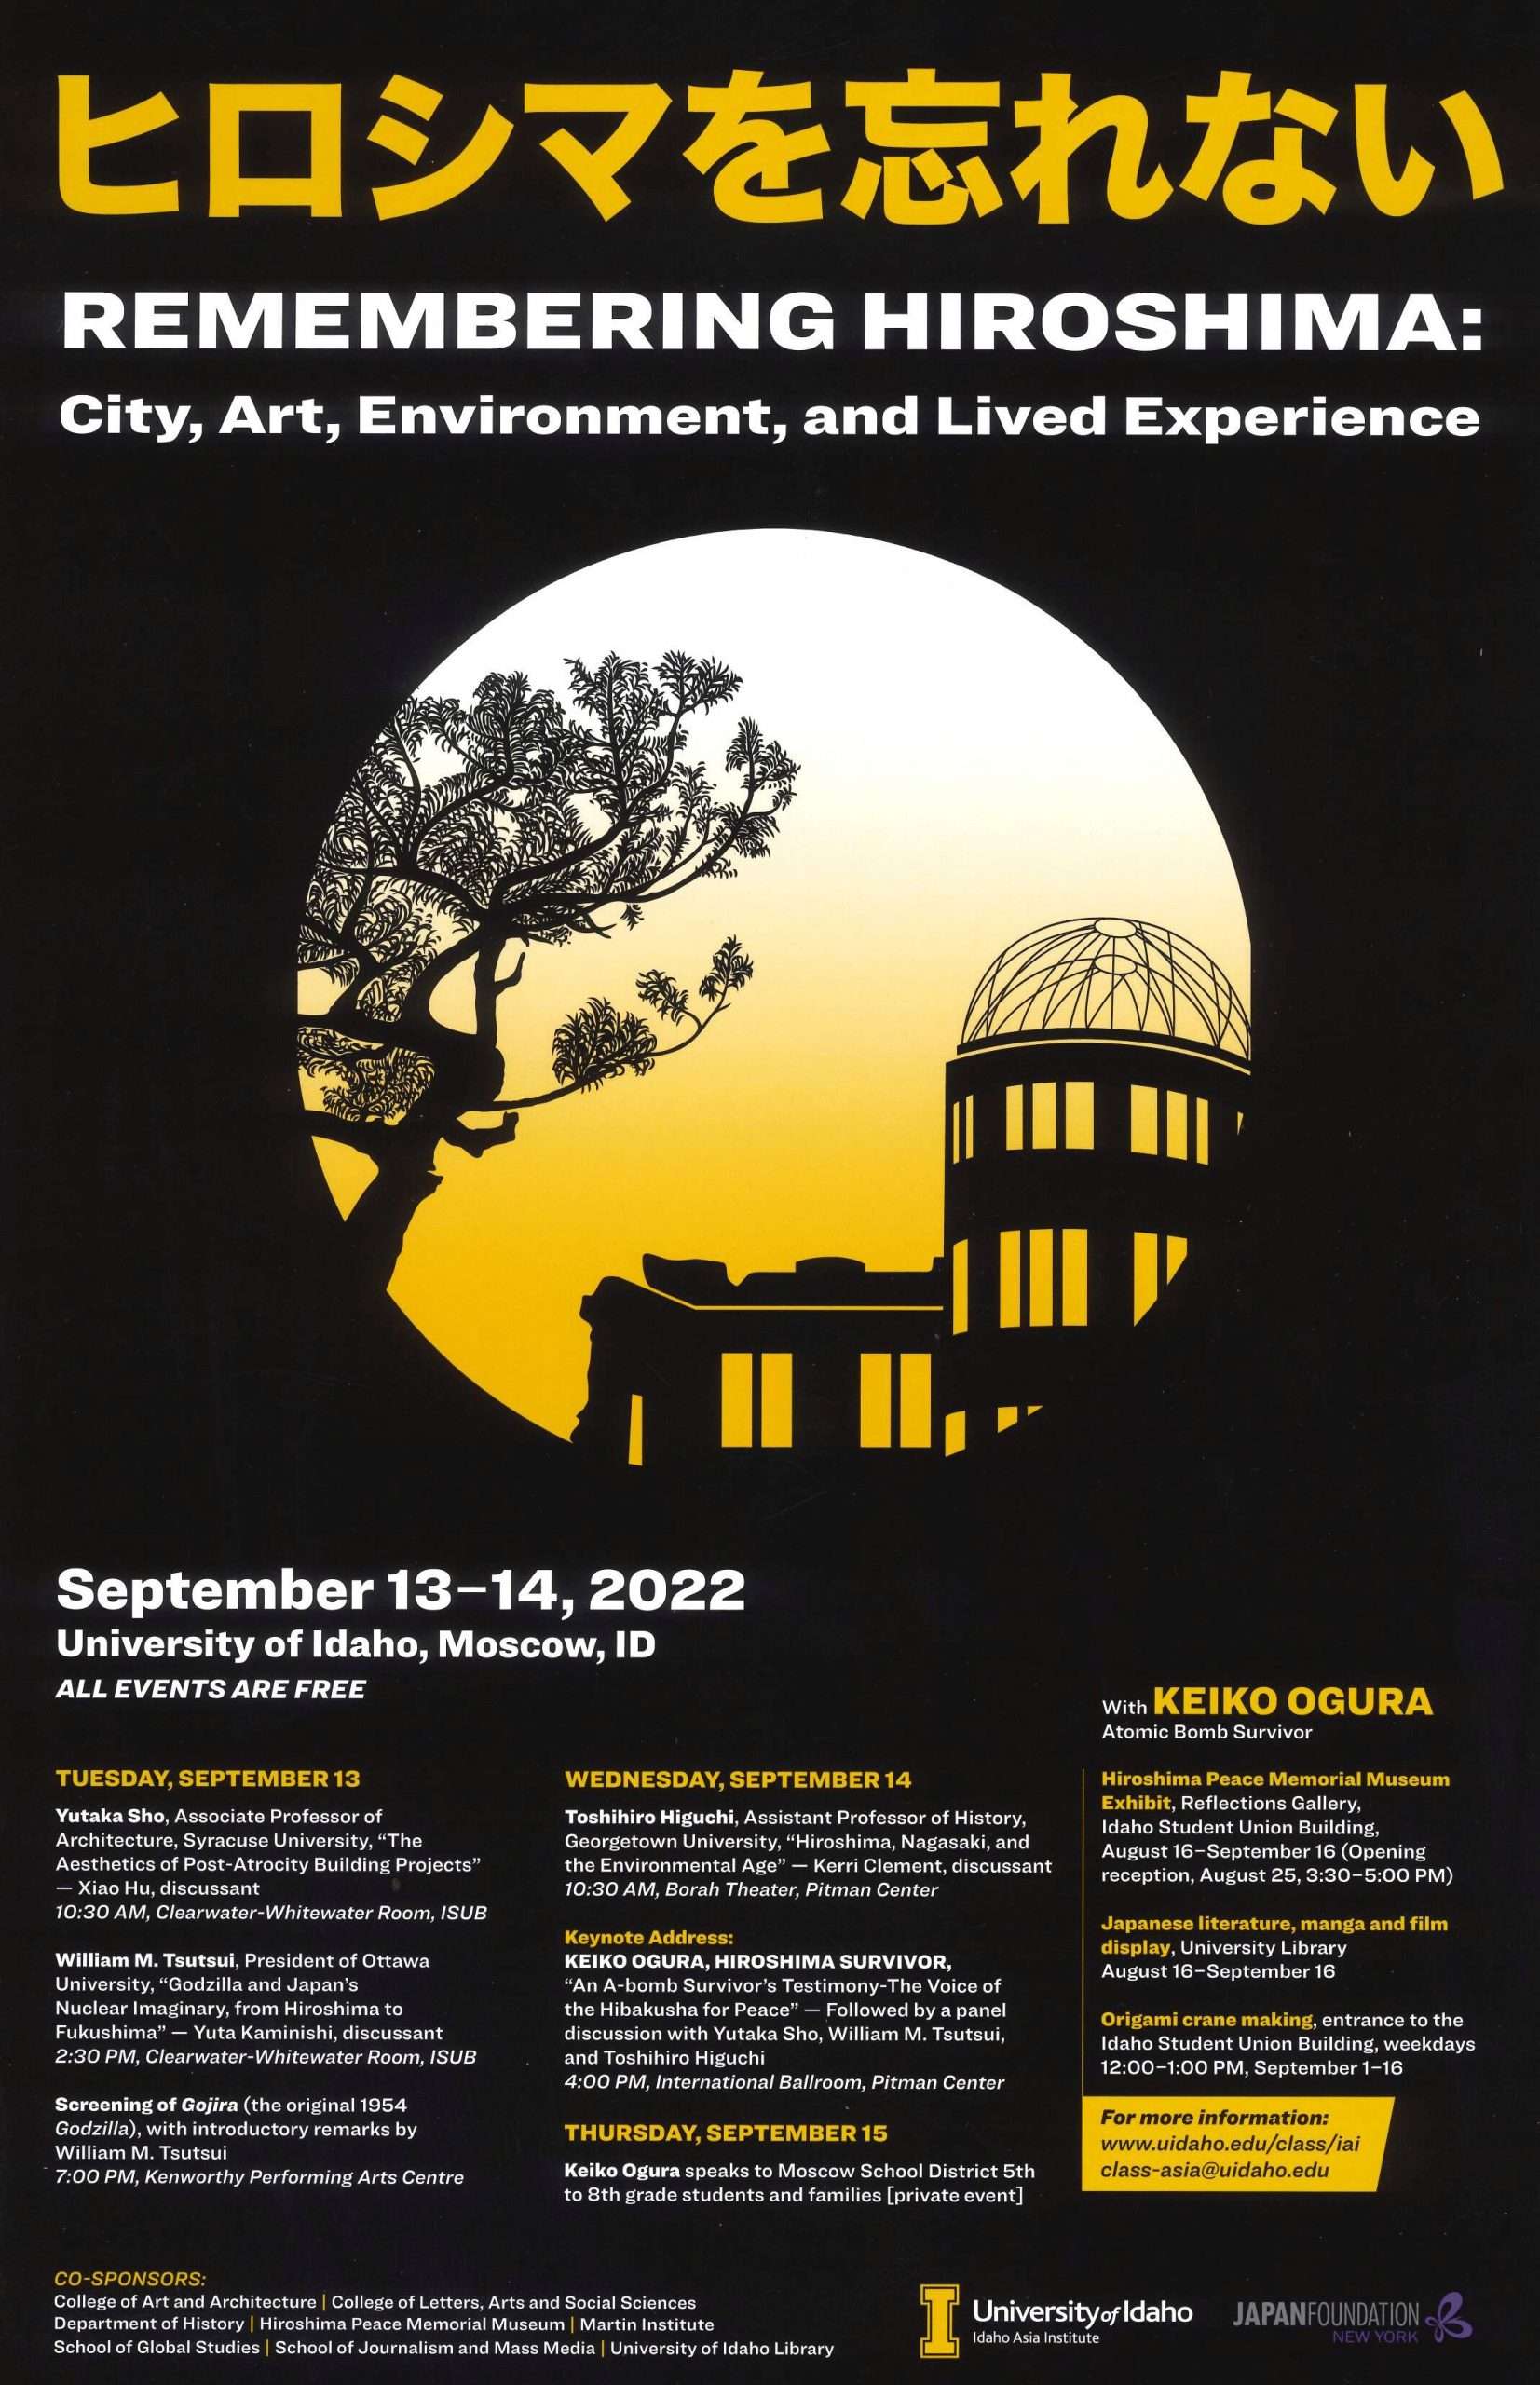 College Events - University of Idaho Library